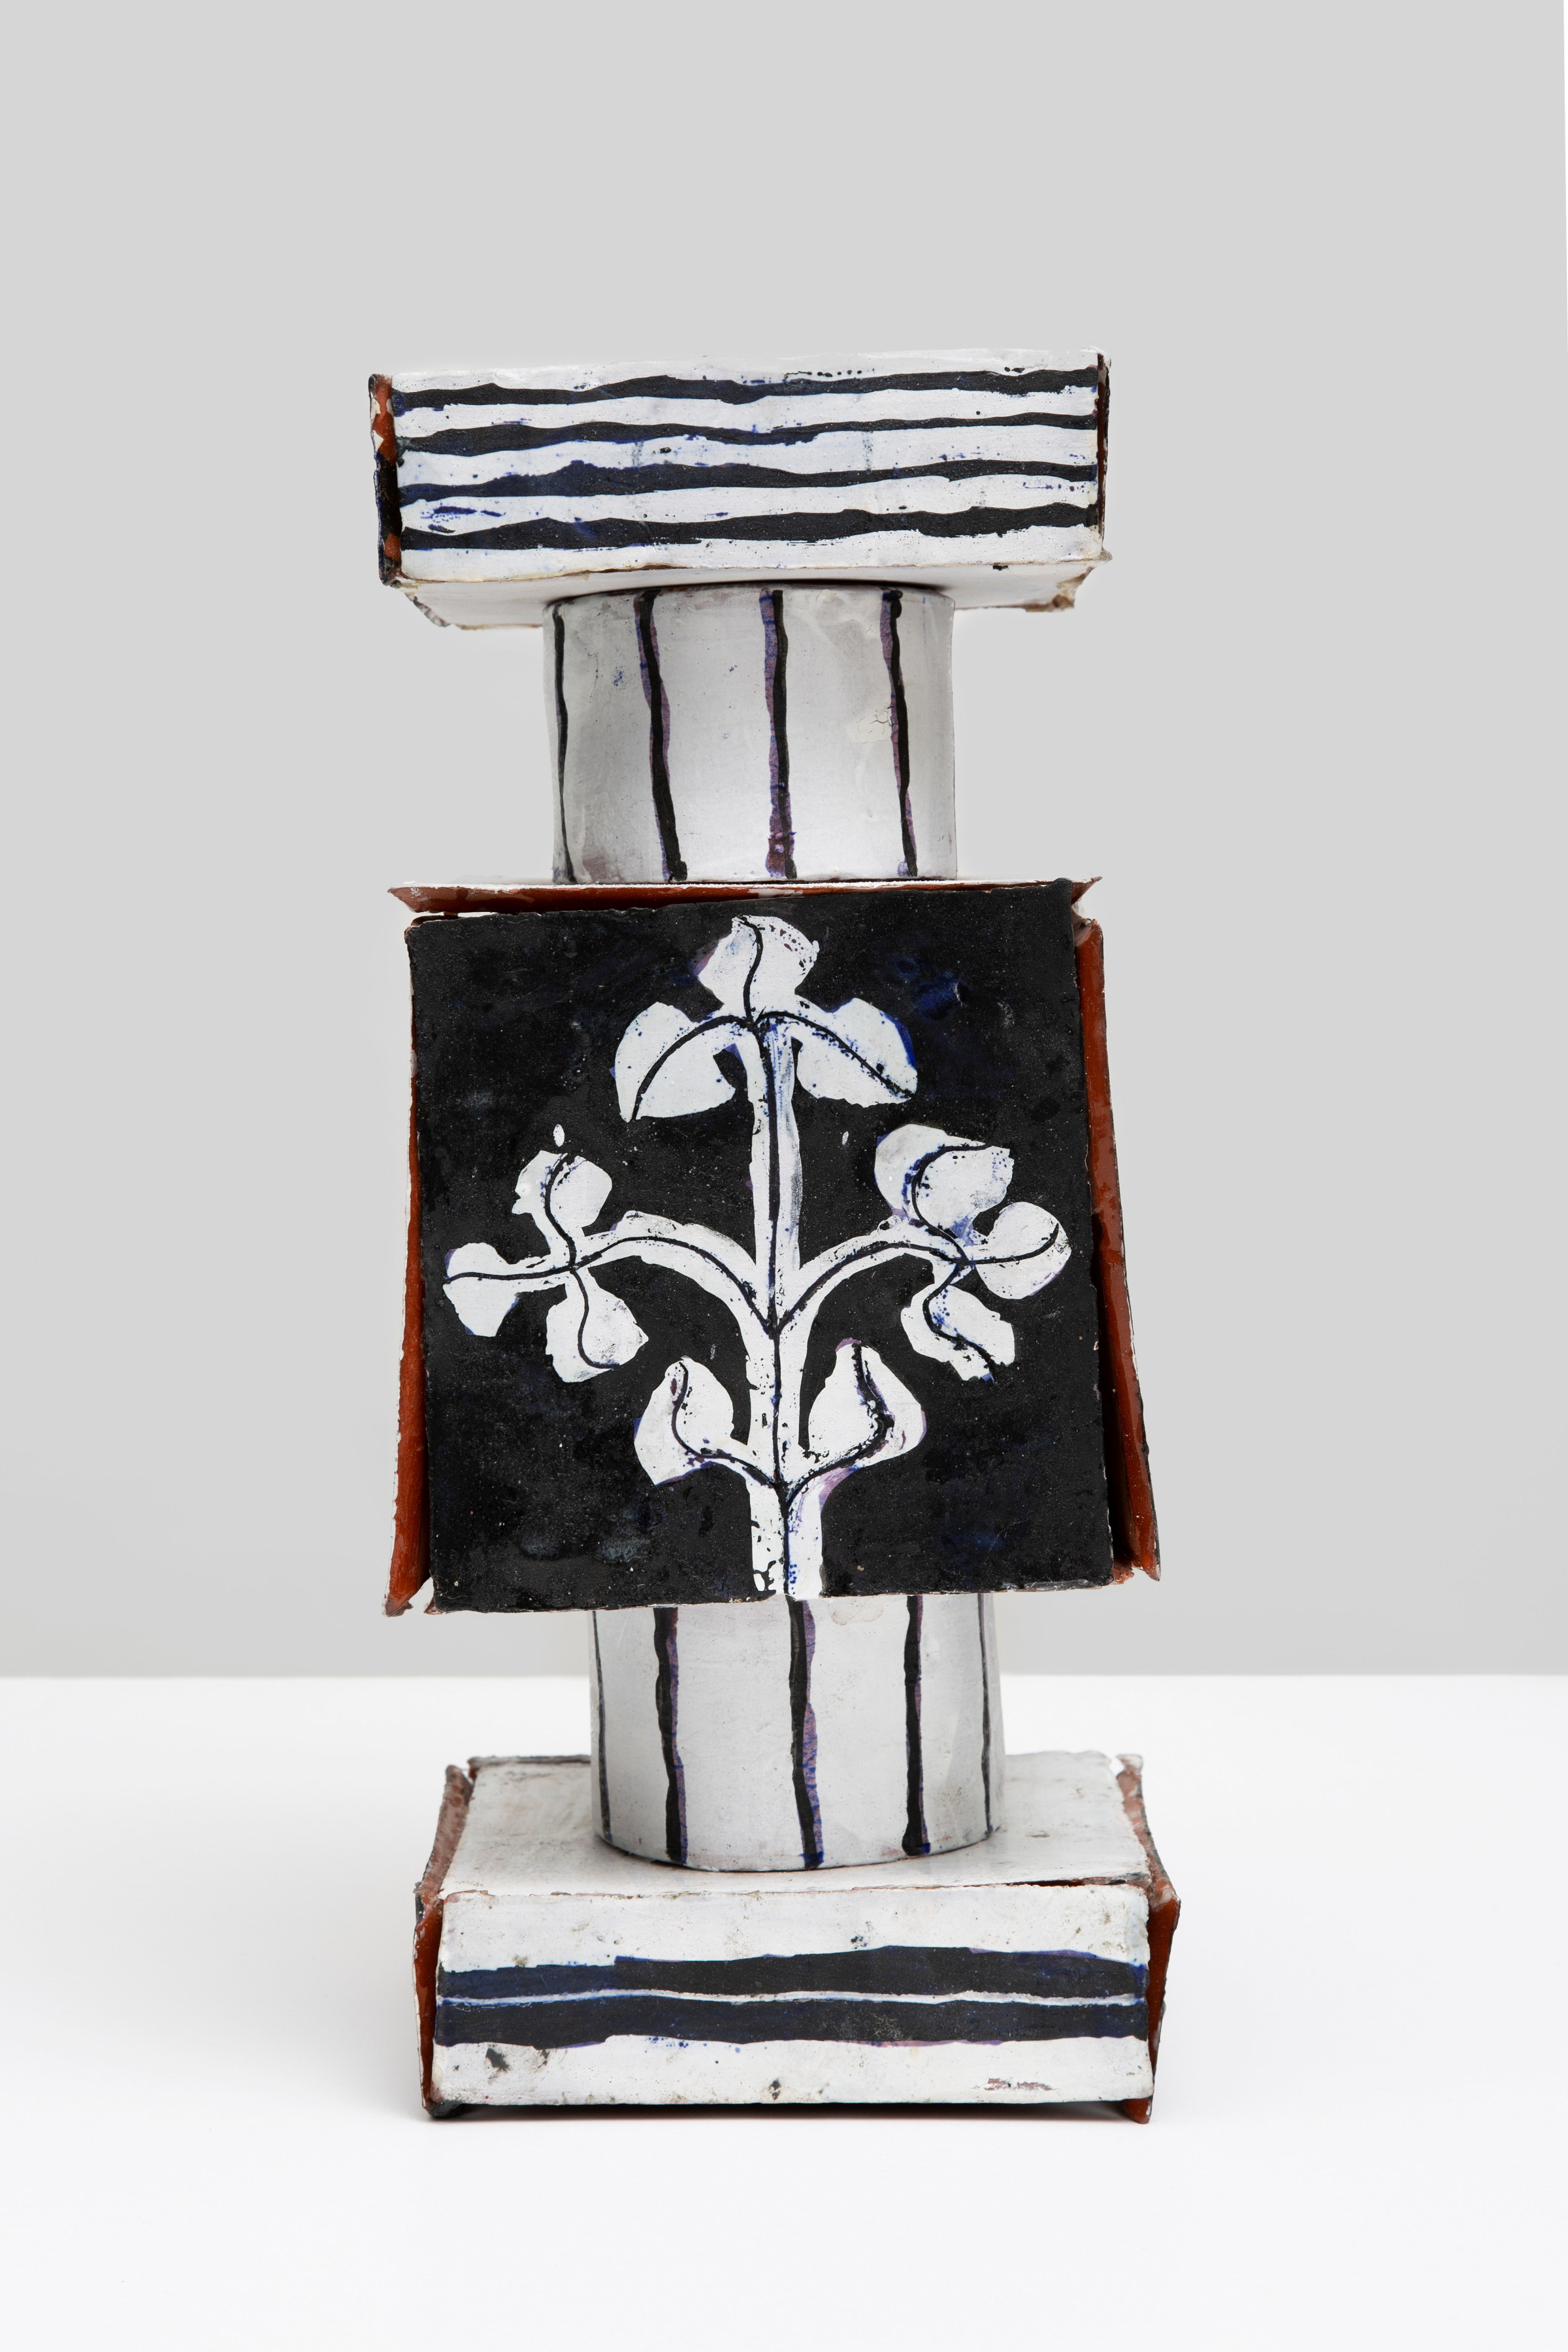 Small Assembled Square Tile Stack with Flower and Hourglass, 2017, Glazed earthenware